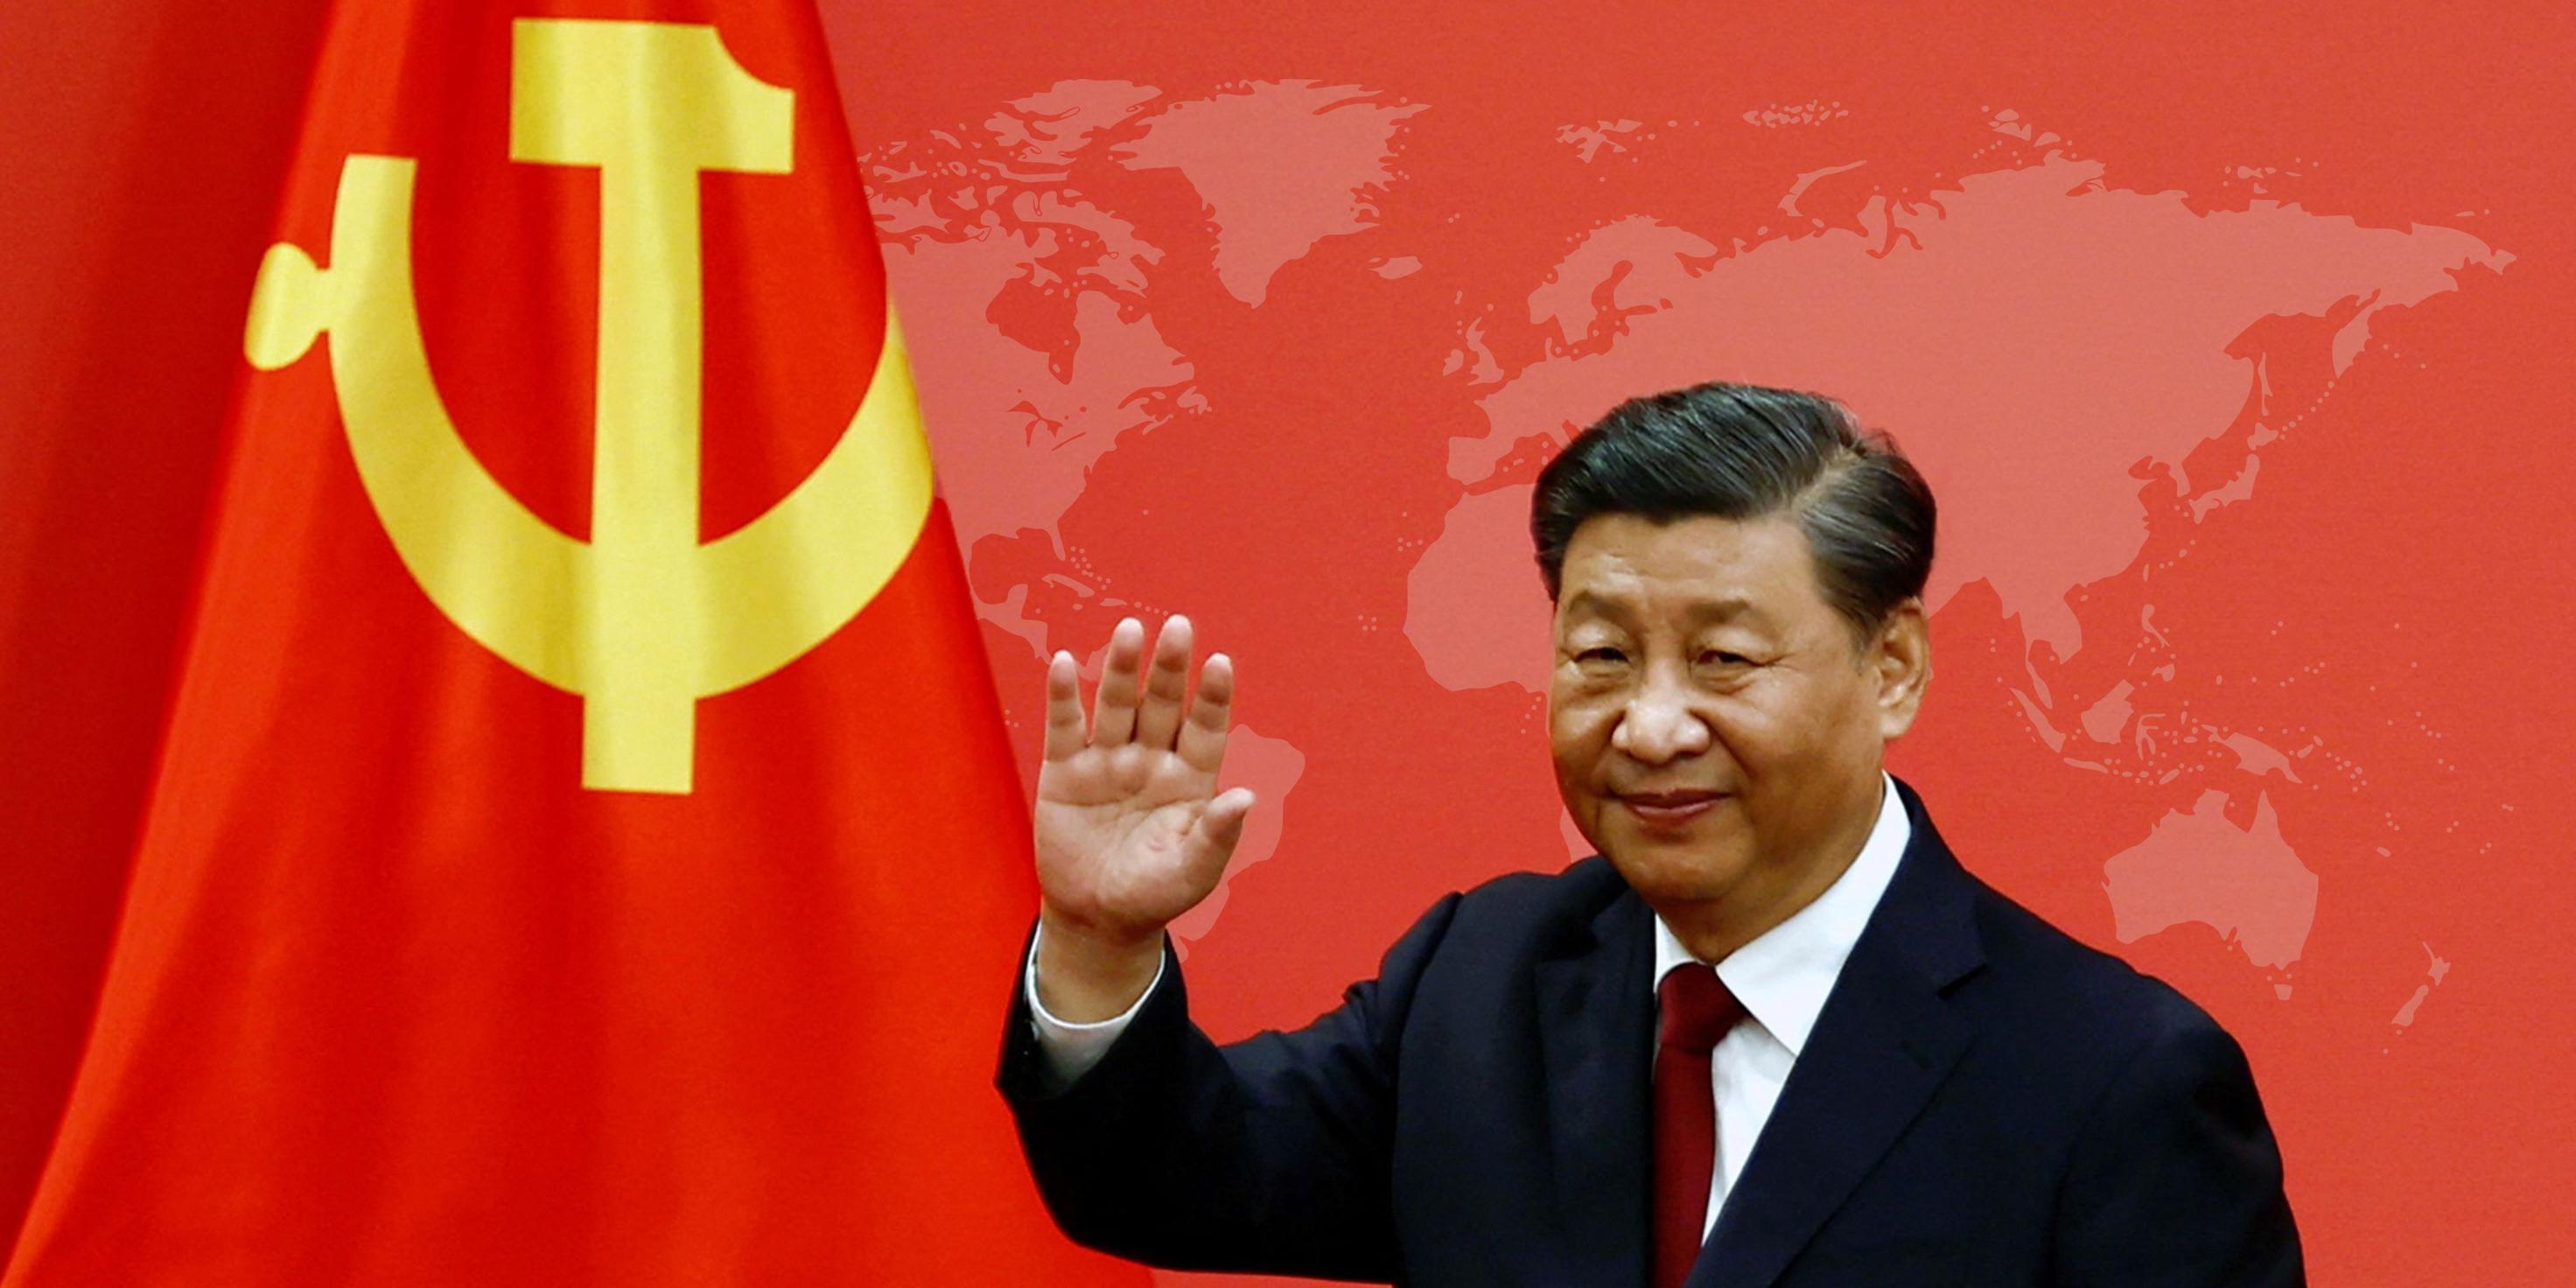 How Does China's Leadership View Regional and International Crises?